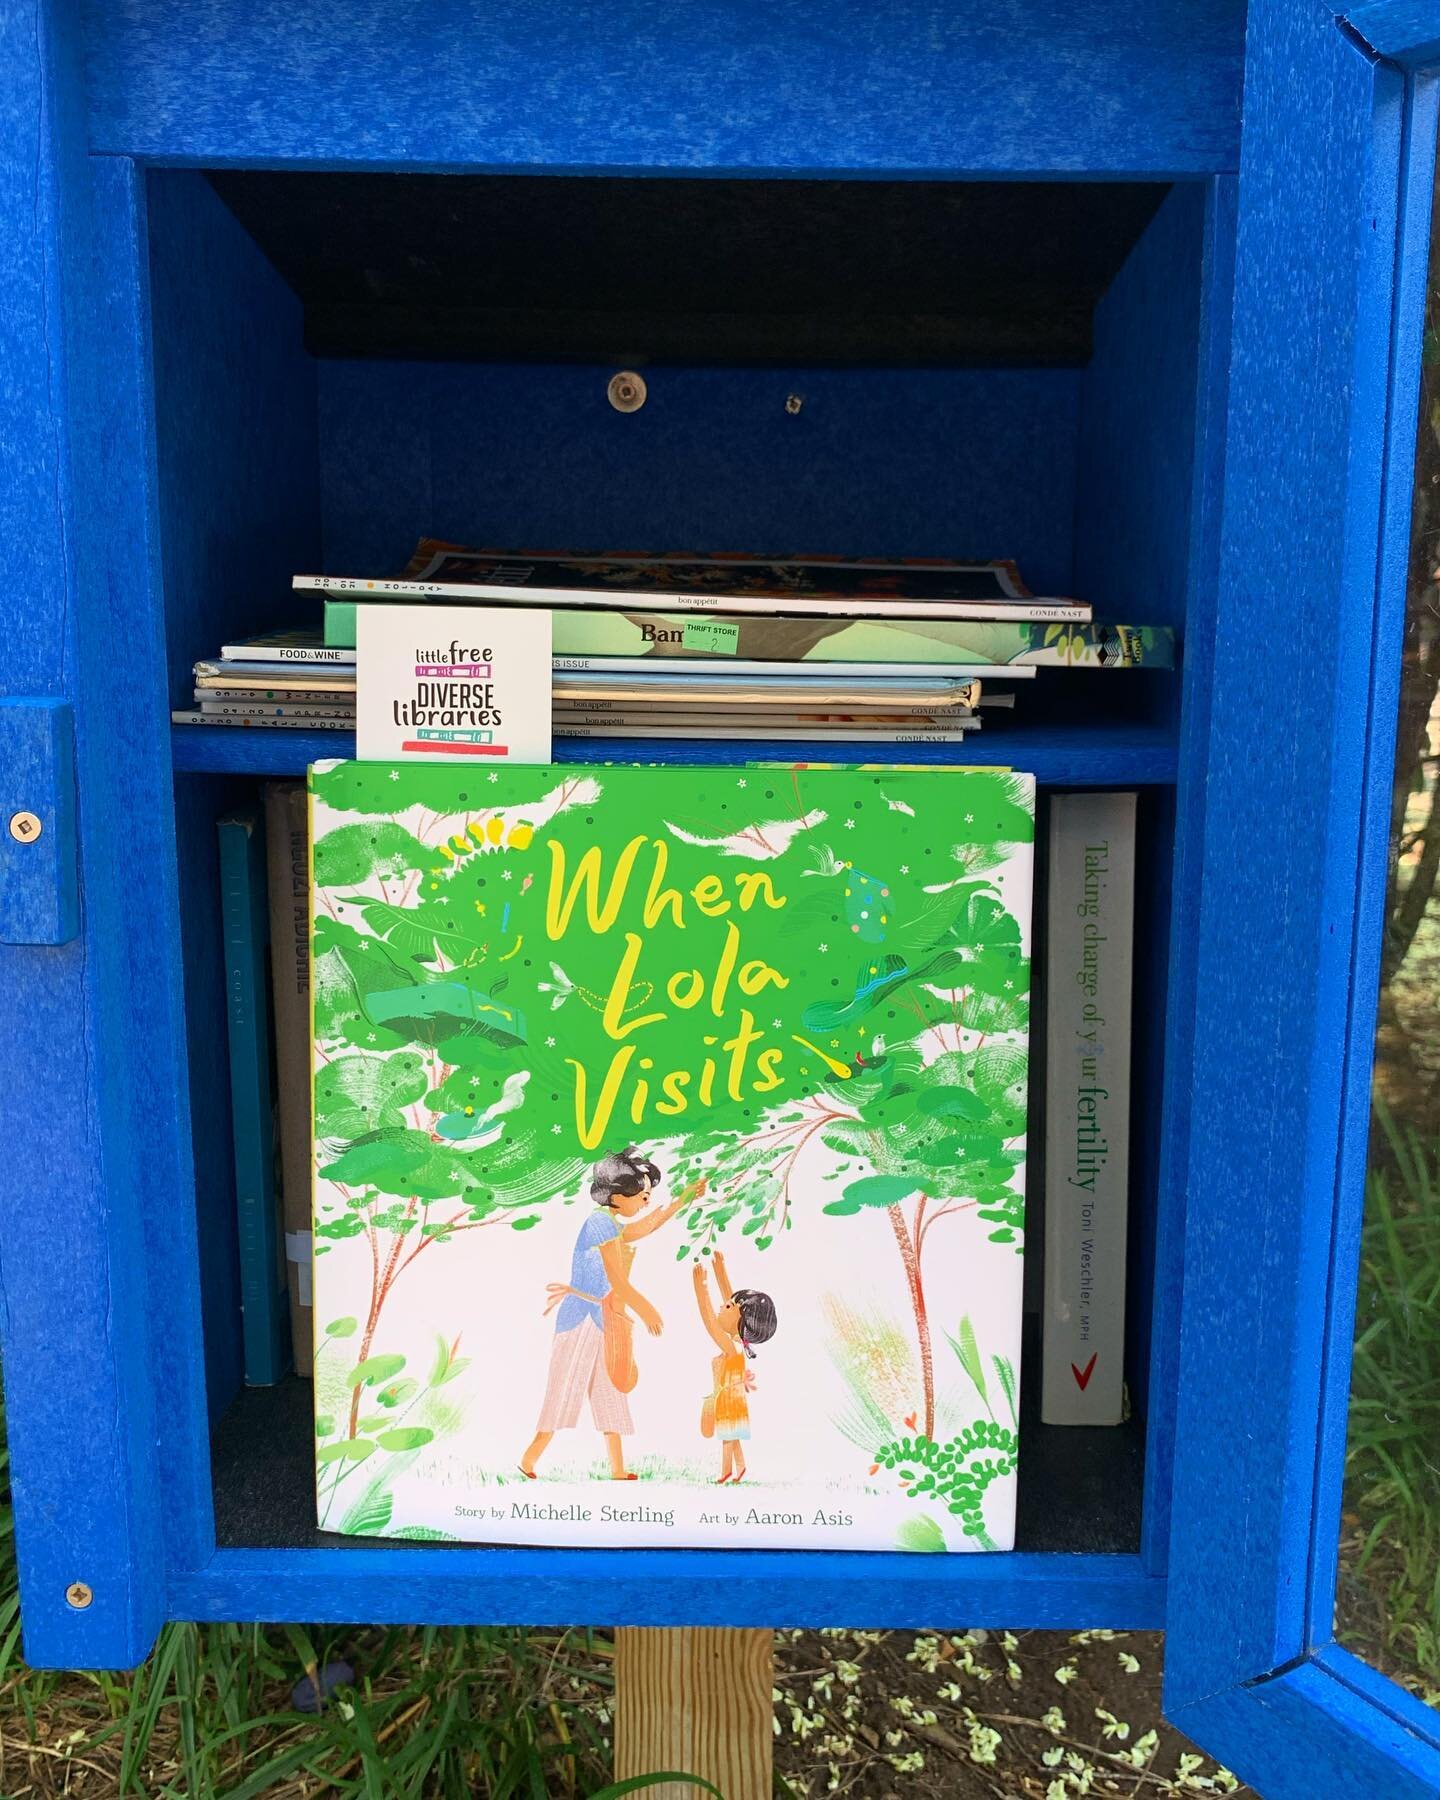 Just put &lsquo;When Lola Visits&rsquo; by  @averyandaugustine and illustrated by @aaronasis into a @littlefreelibrary 📗 This book is the perfect sunny summertime read. This books celebrates Filipino culture as the young girl looks forward to her gr